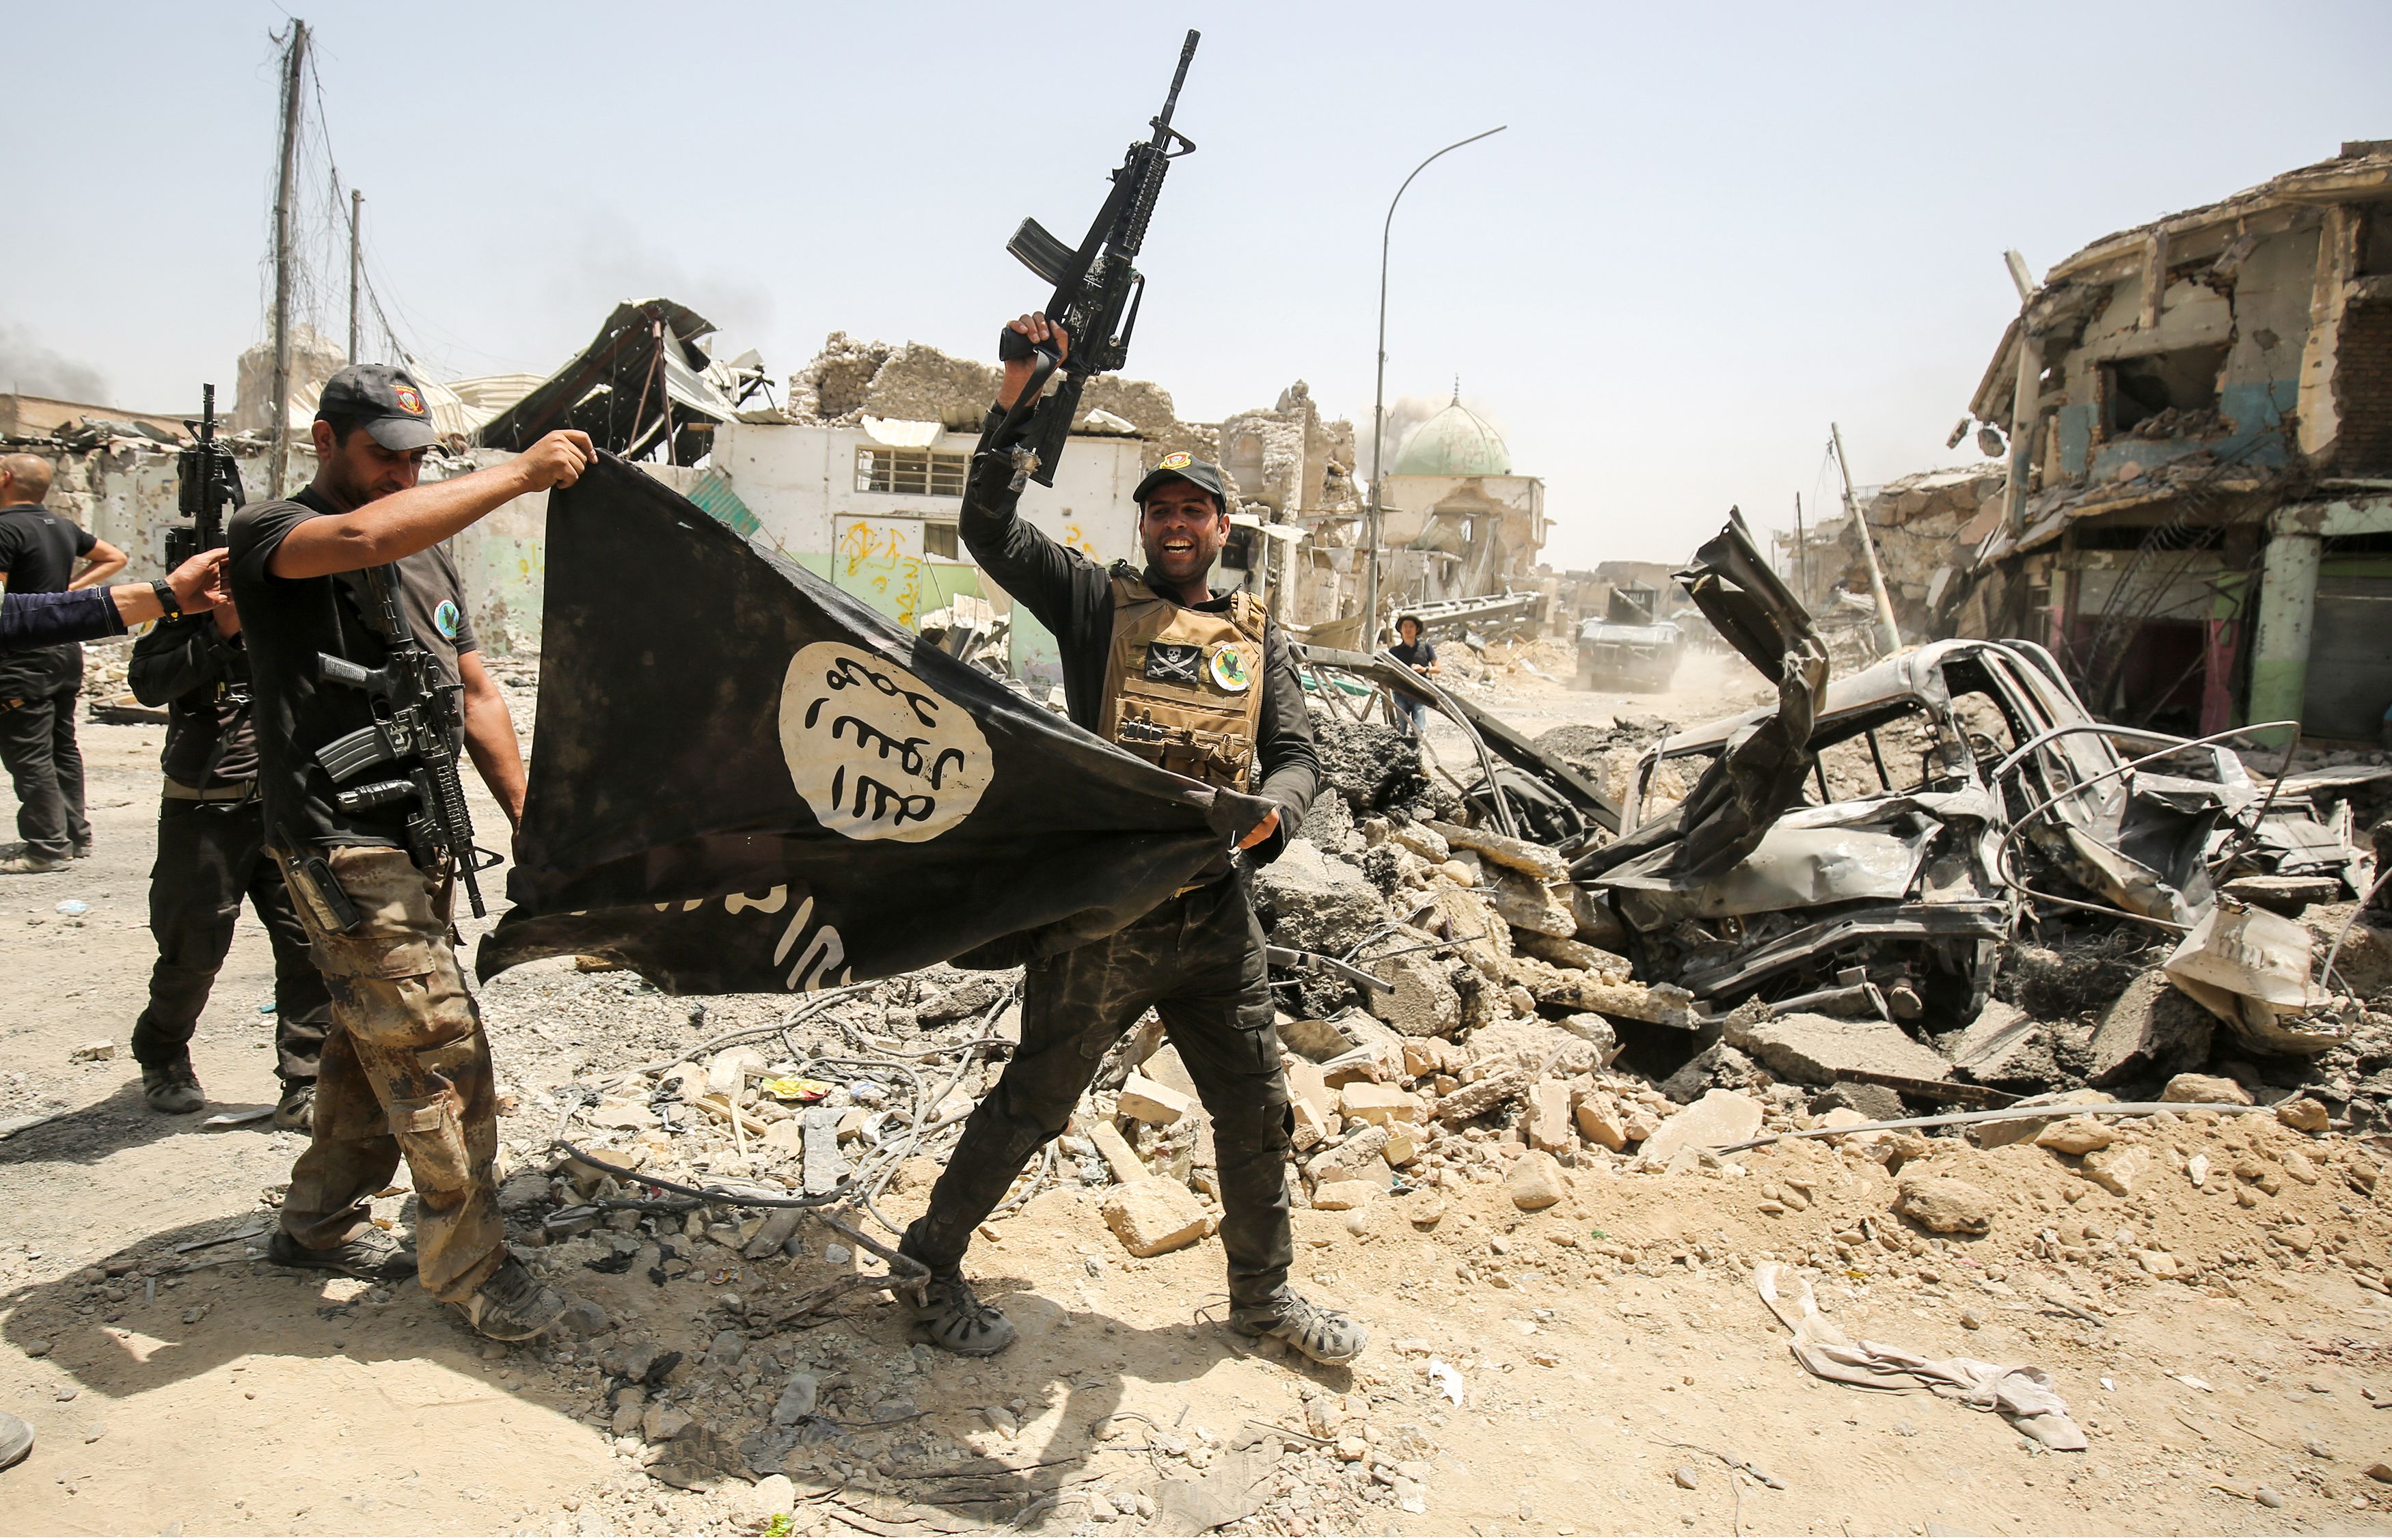 Members of the Iraqi Counter-Terrorism Service (CTS) cheer as they carry upside-down a black flag of the Islamic State (IS) group, with the destroyed Al-Nuri mosque seen in the background, in the Old City of Mosul on July 2, 2017, during the offensive to retake the city from IS fighters.